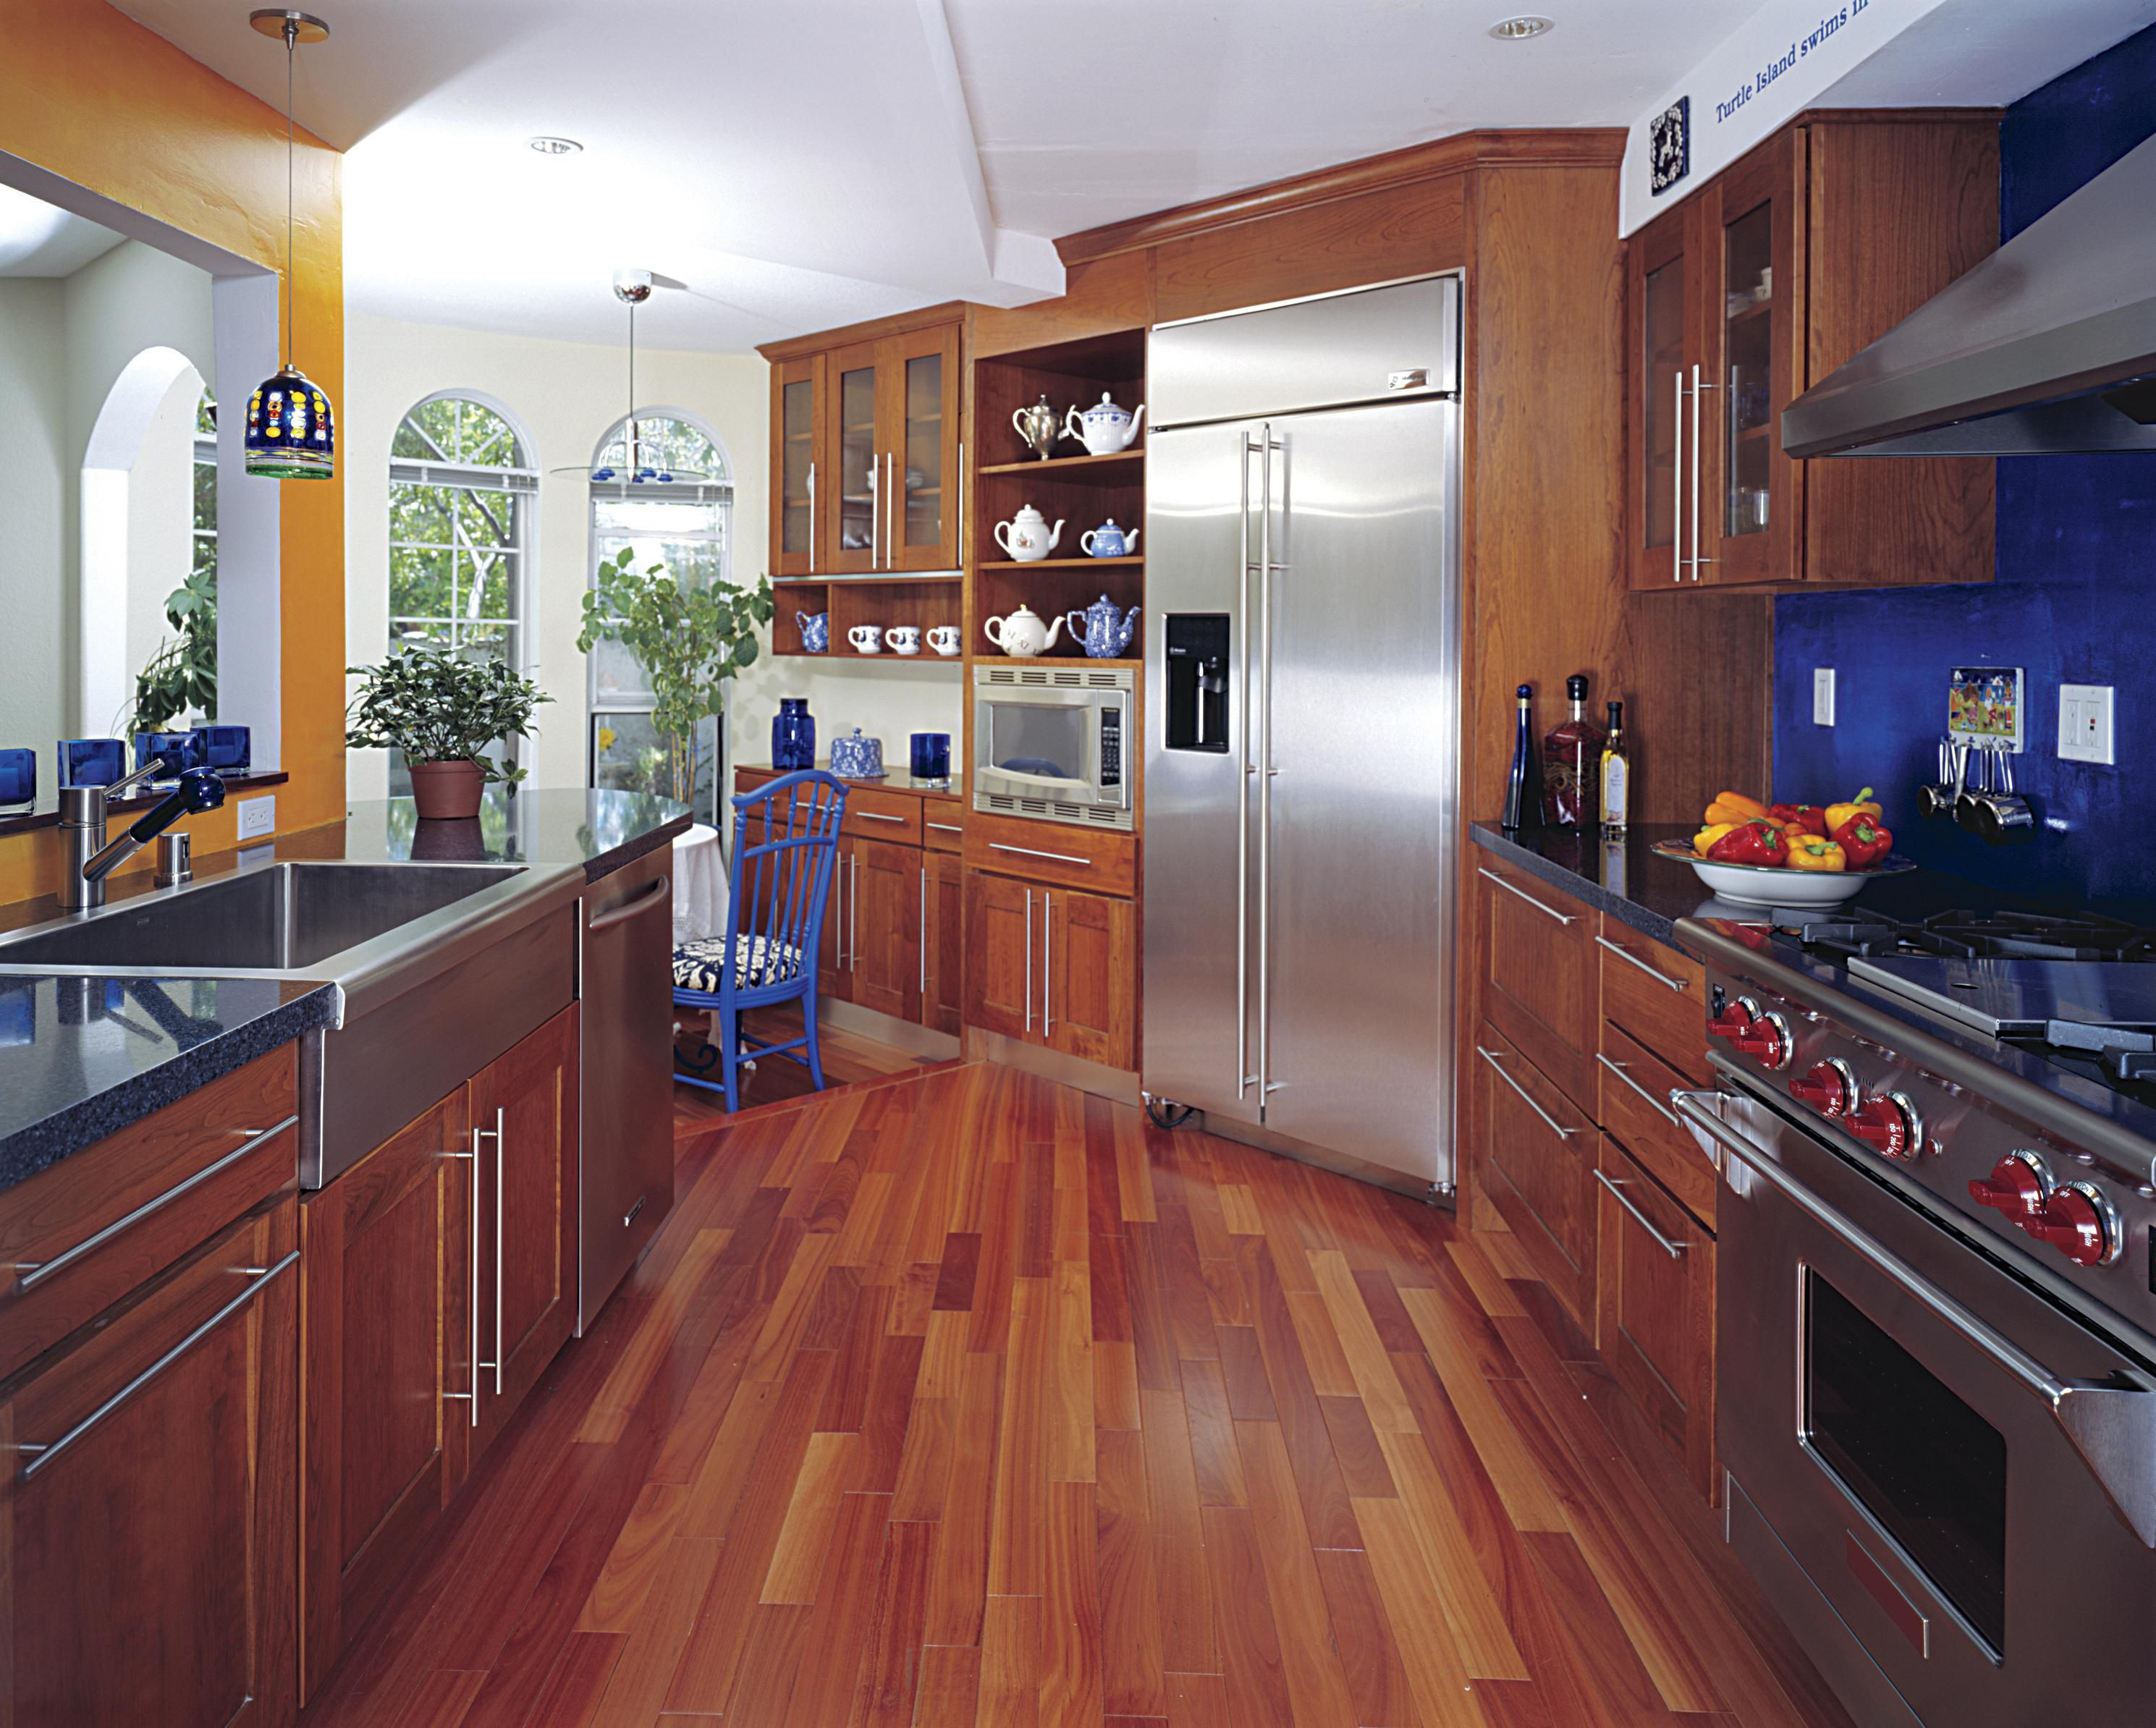 3 8 vs 3 4 hardwood flooring of hardwood floor in a kitchen is this allowed within 186828472 56a49f3a5f9b58b7d0d7e142